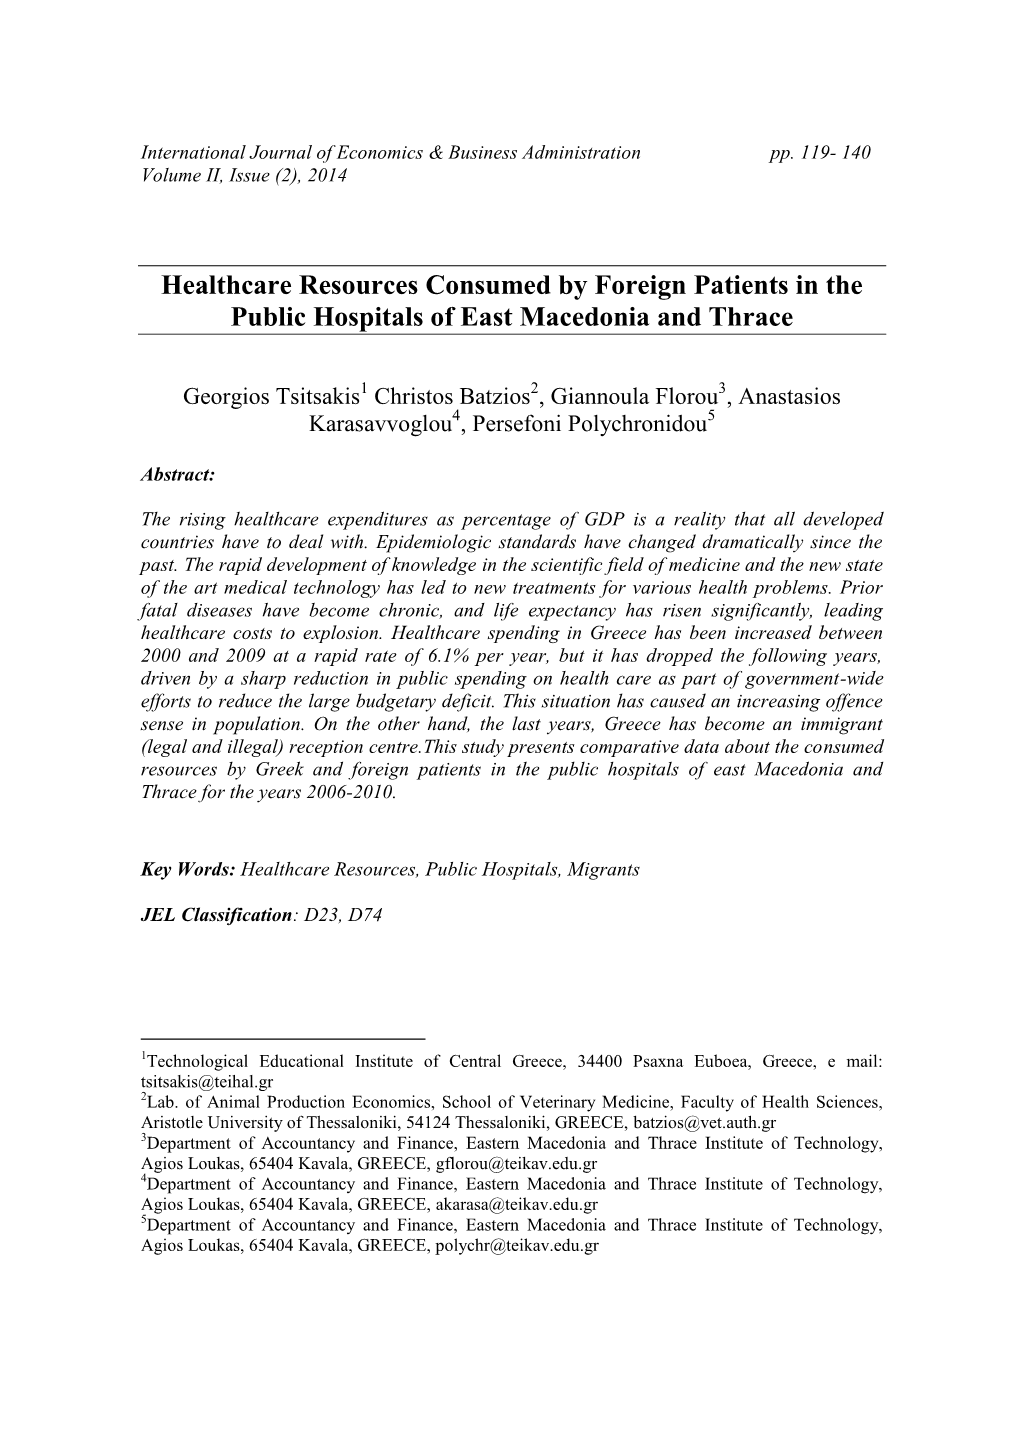 Healthcare Resources Consumed by Foreign Patients in the Public Hospitals of East Macedonia and Thrace